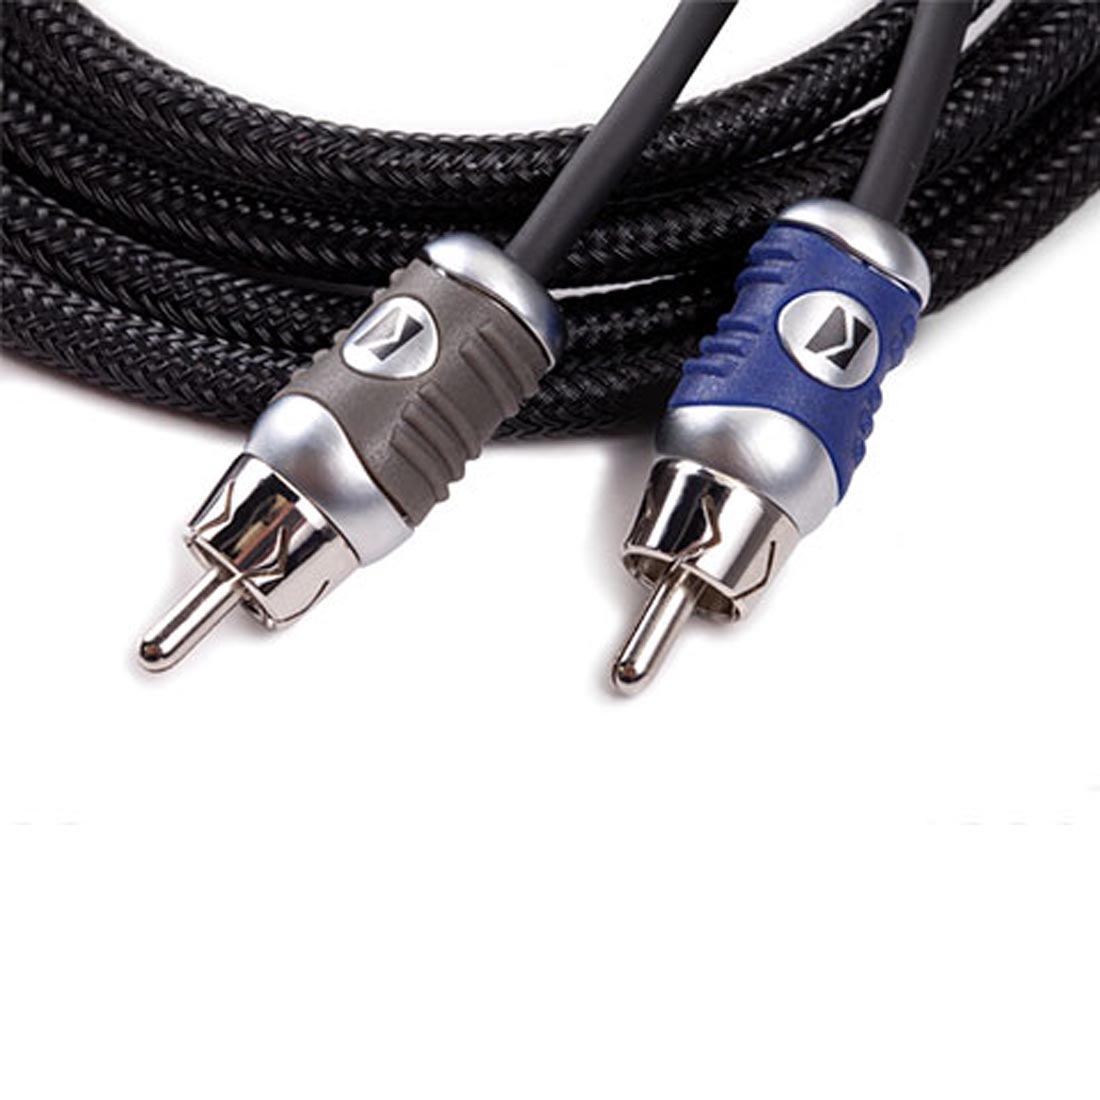 Kicker 46QI26 Q-Series Interconnect, 2-Channel RCA Signal Cable - 6 Meters